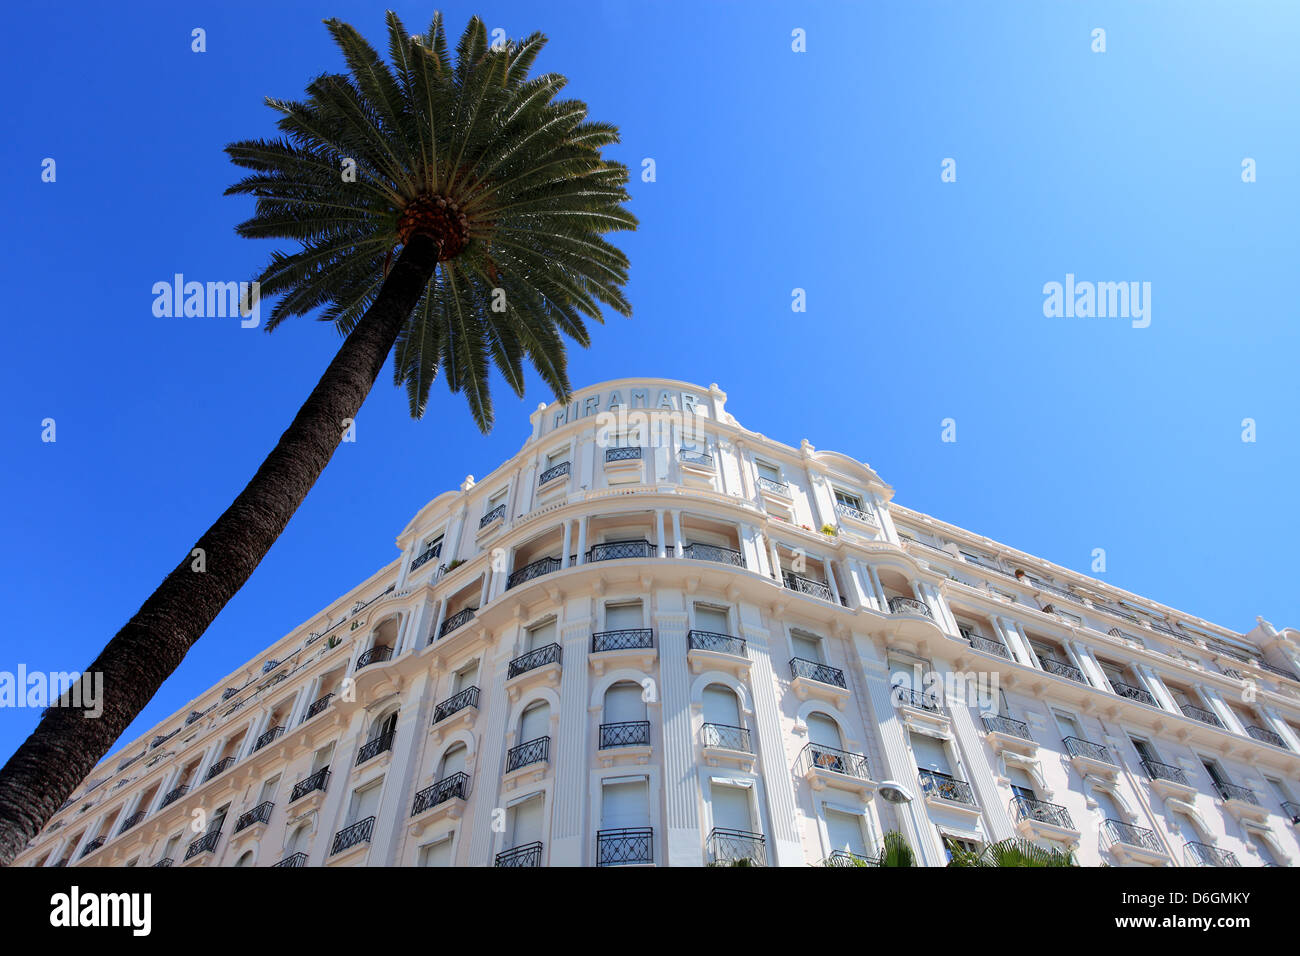 The Miramar building in Cannes Croisette, French Riviera, France Stock Photo